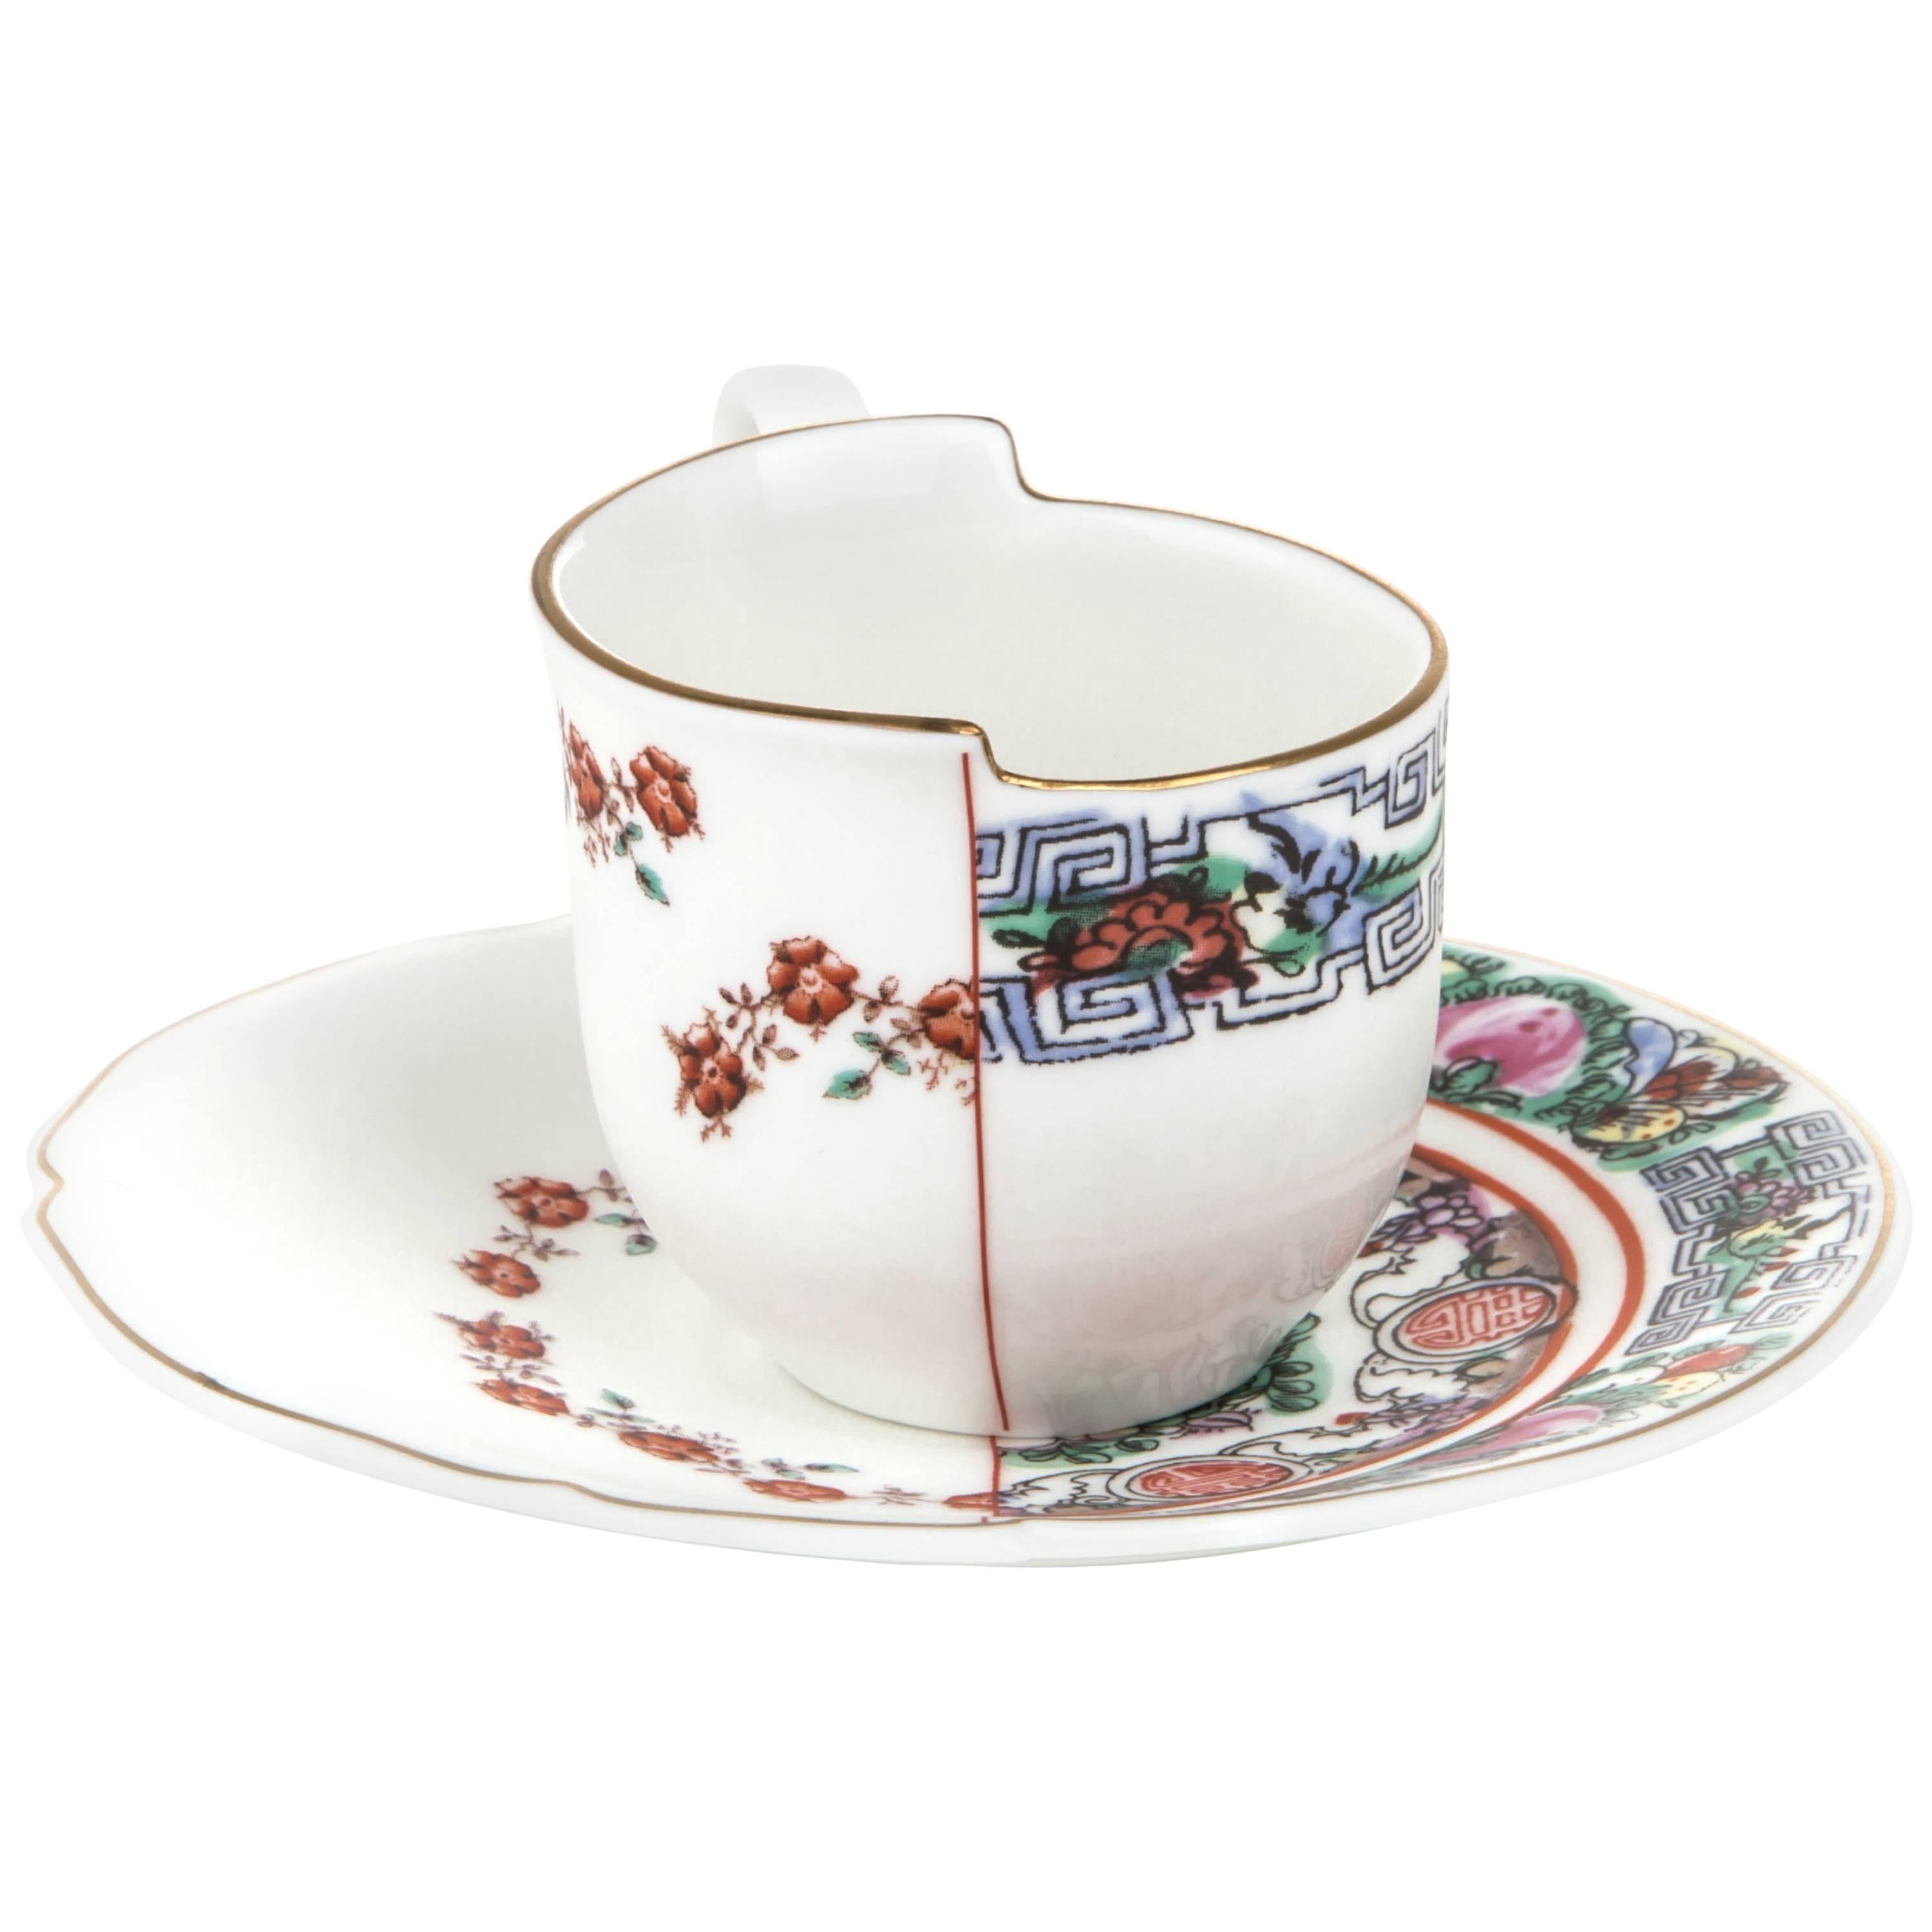 Seletti "Hybrid-Tamara" Coffee Cup with Saucer in Porcelain For Sale